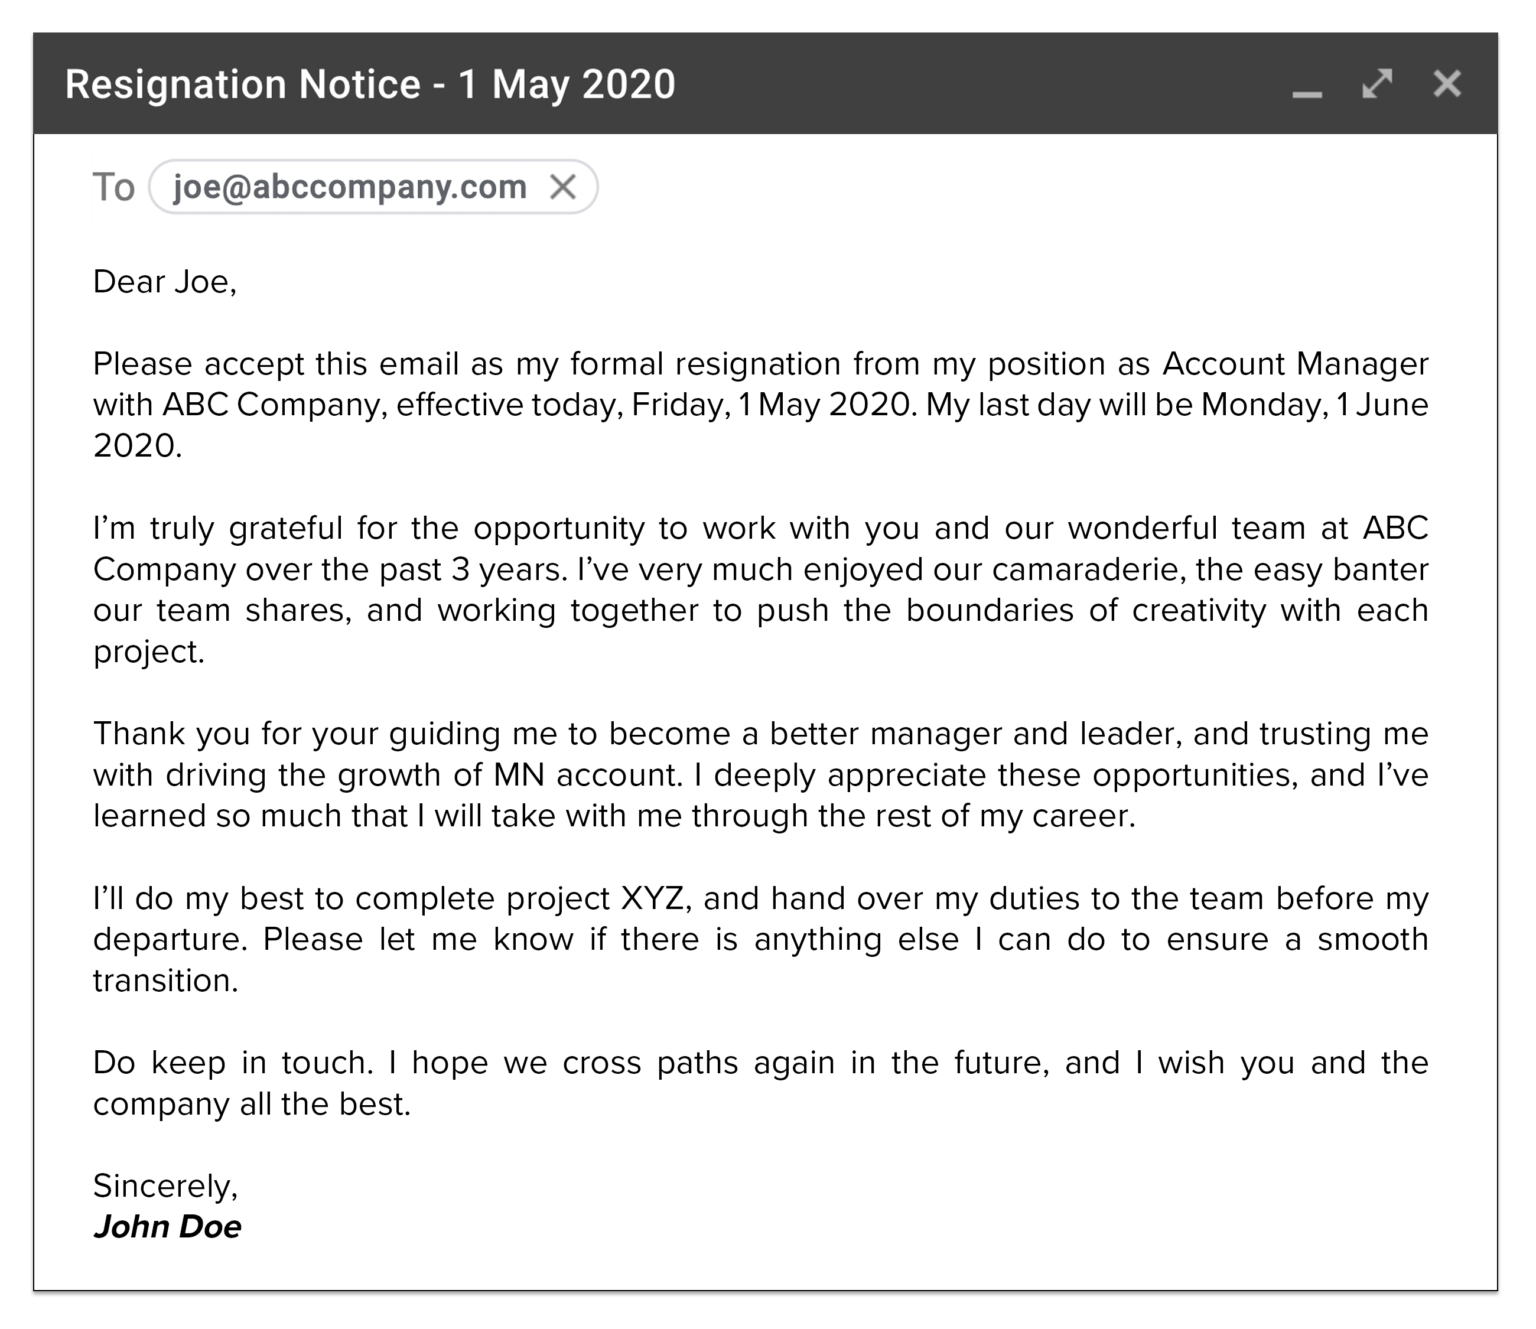 How to Write a Resignation Letter | Free Resignation ...